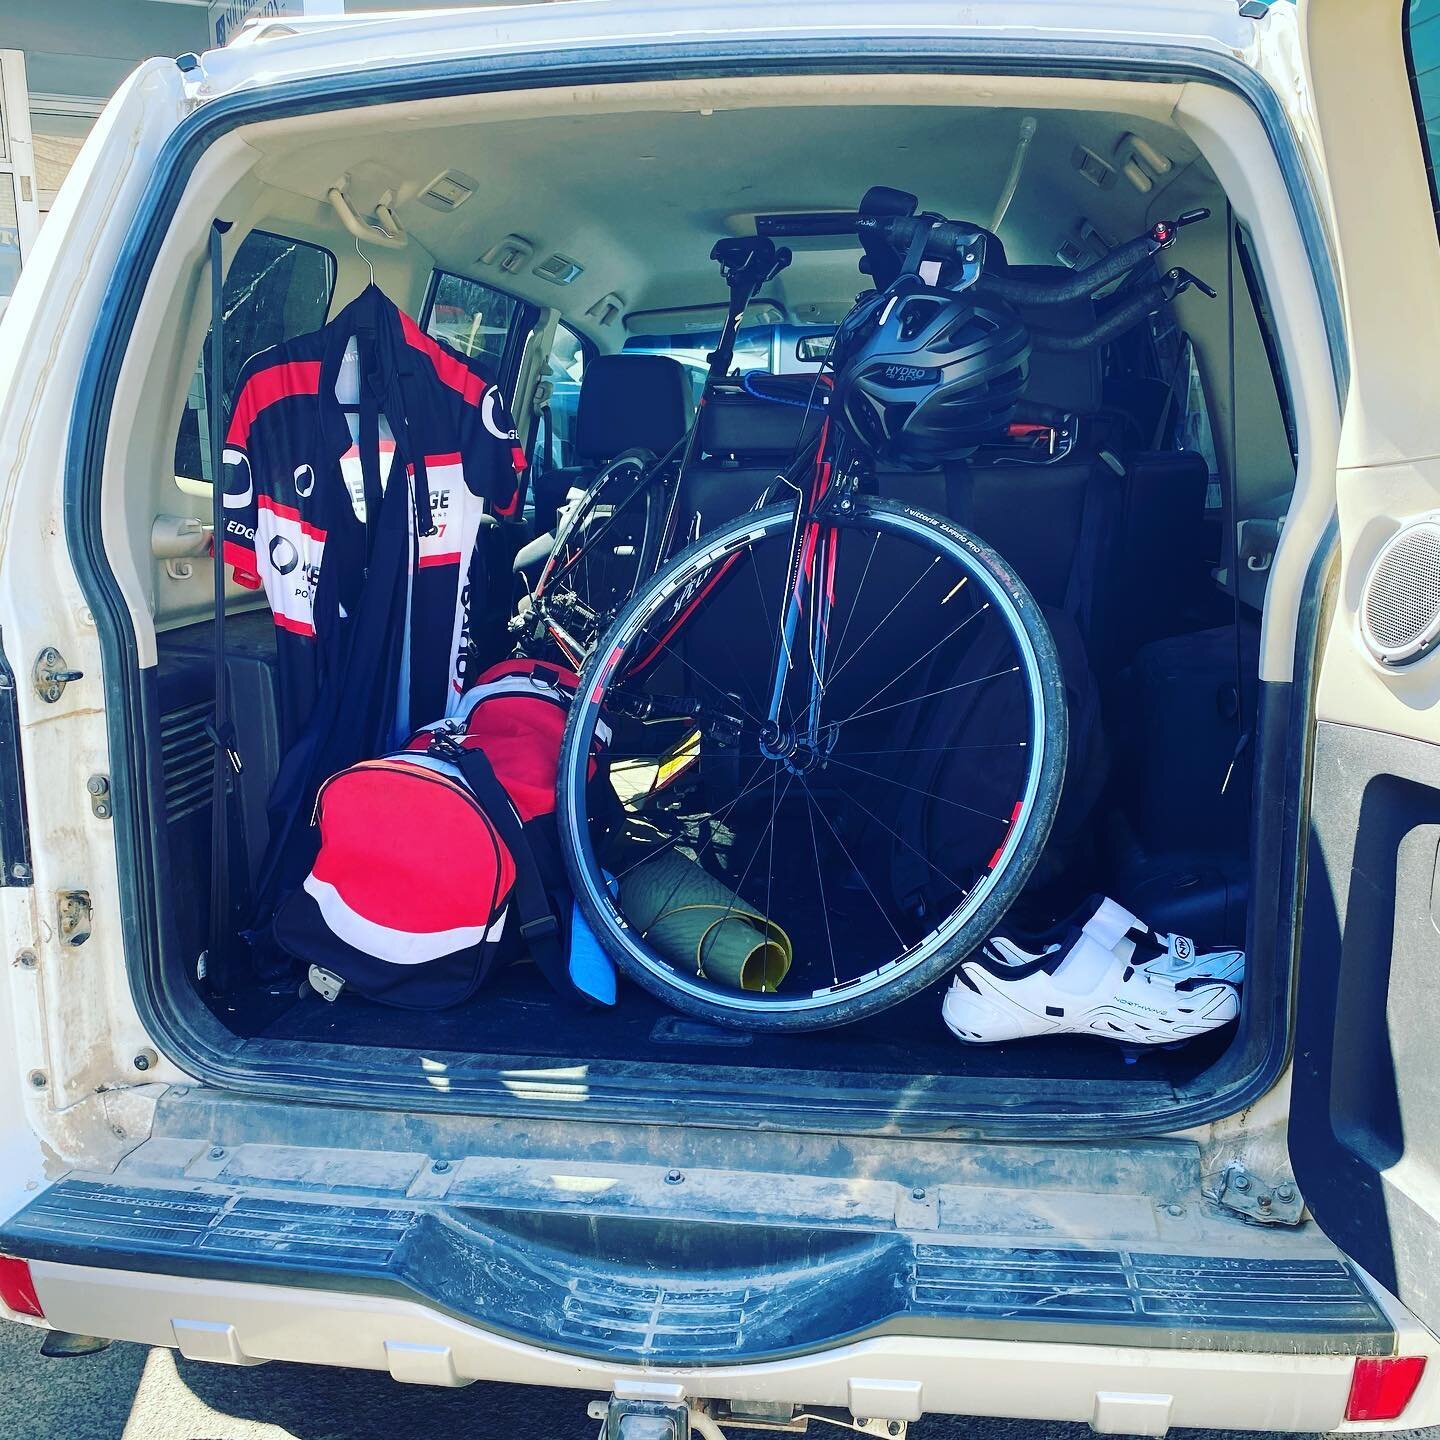 The back of my Pajero has never looked so good
.
Clearly I've developed a red theme - but hey, red = fast right? 
.
I've been impressed with the amount of planning and coordination #triathlon takes. Perhaps that is another element of the discipline
.